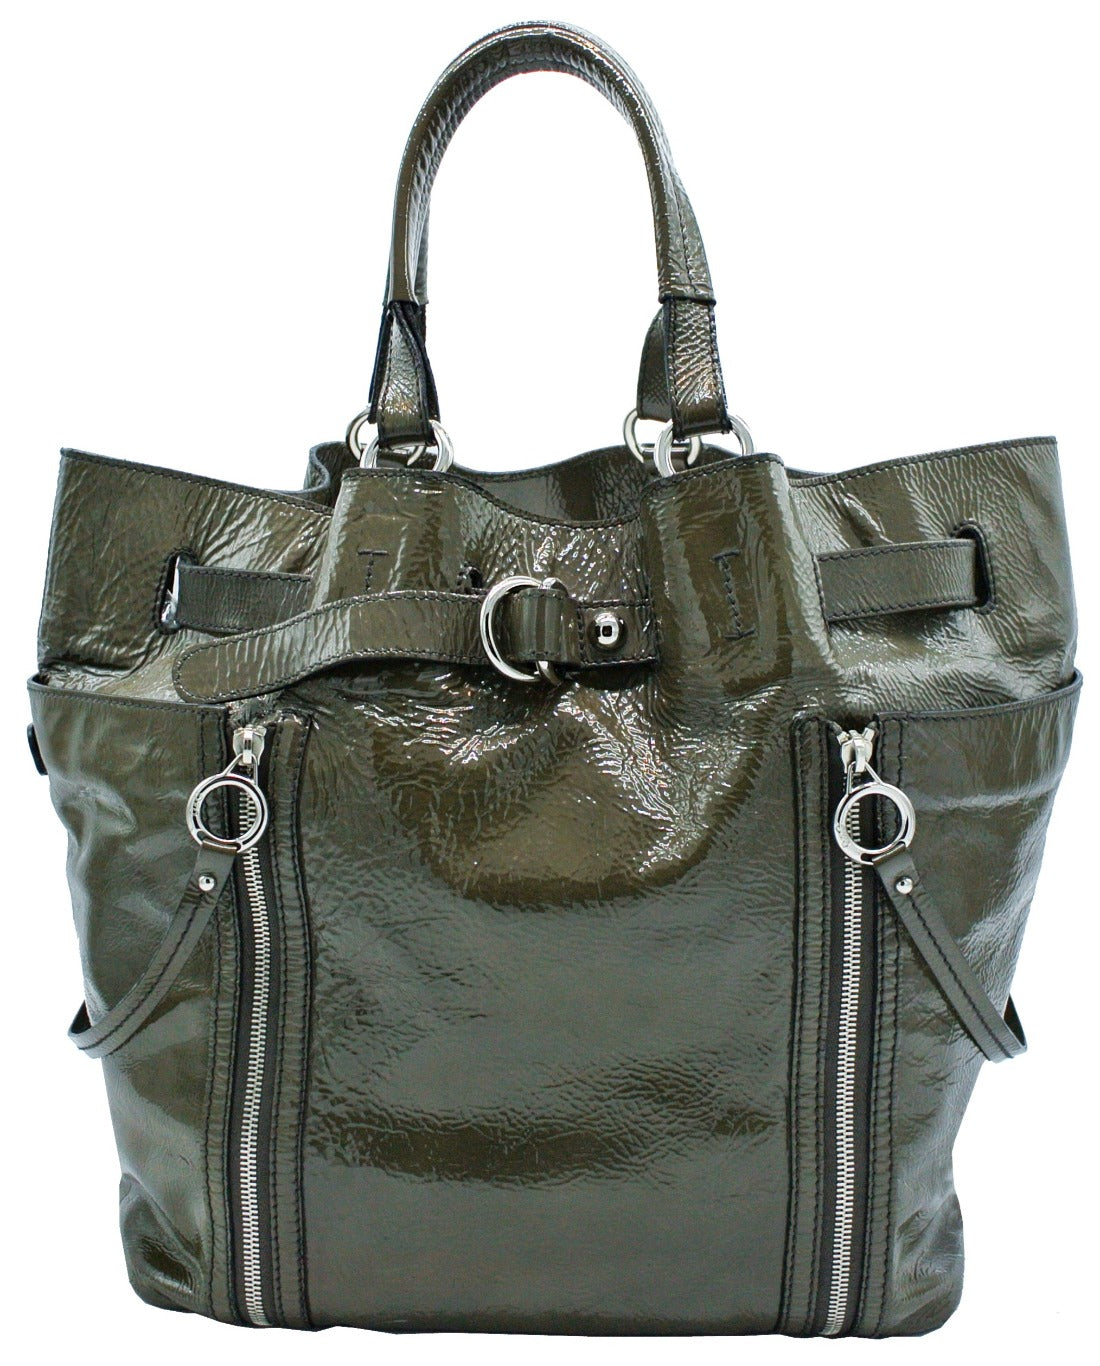 D & G Gaia Olive Patent Leather Large Tote Bag Dolce & Gabbana